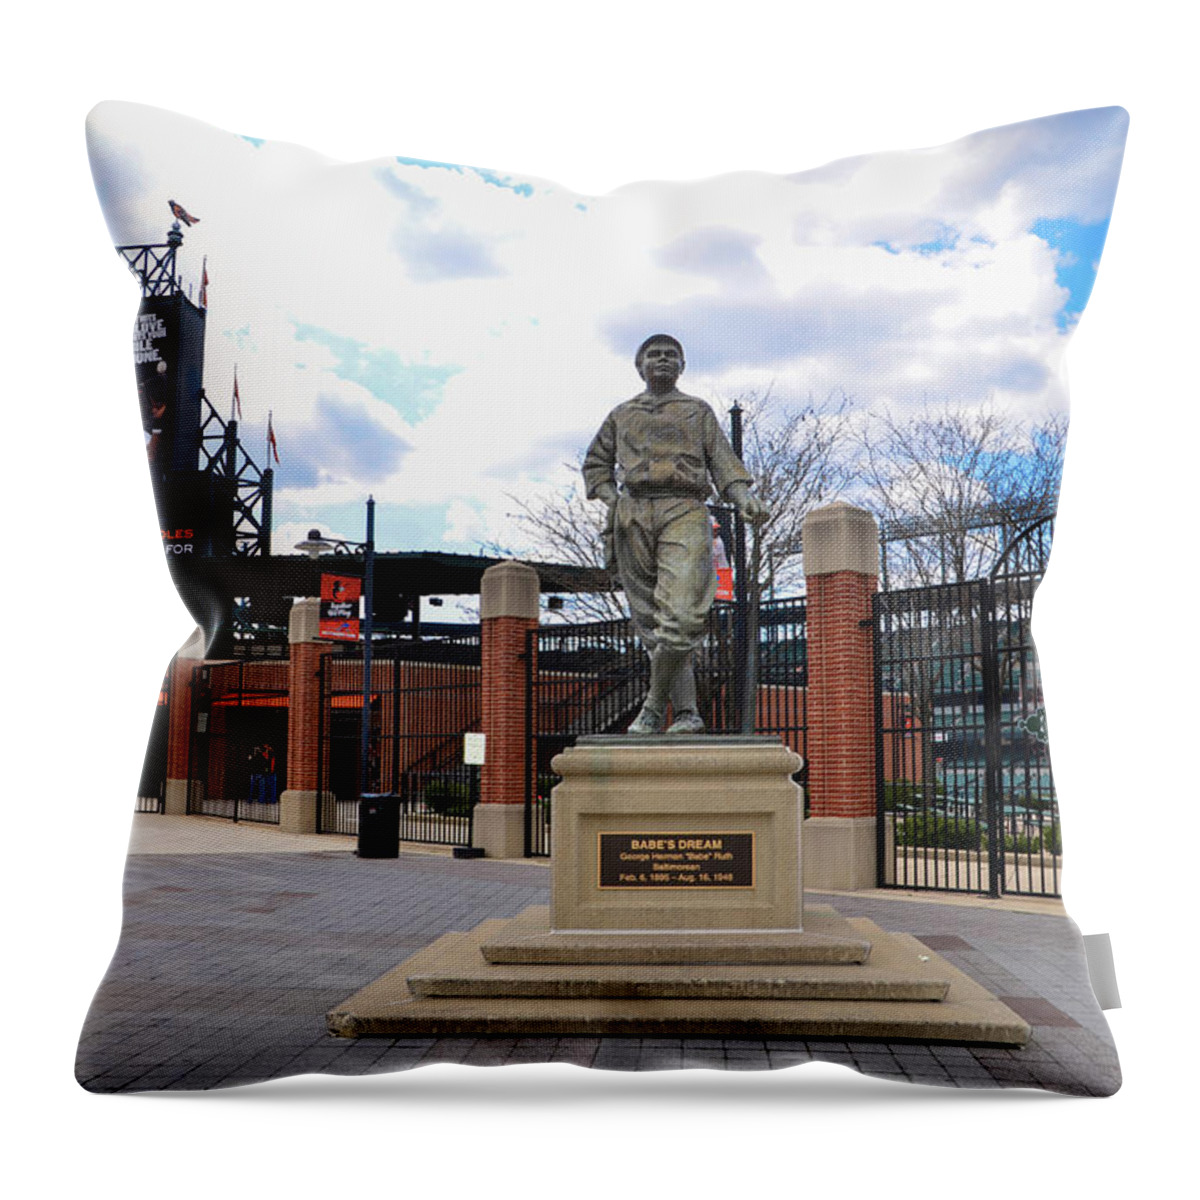 Babes Throw Pillow featuring the photograph Babes Dream - Camden Yards Baltimore by Bill Cannon